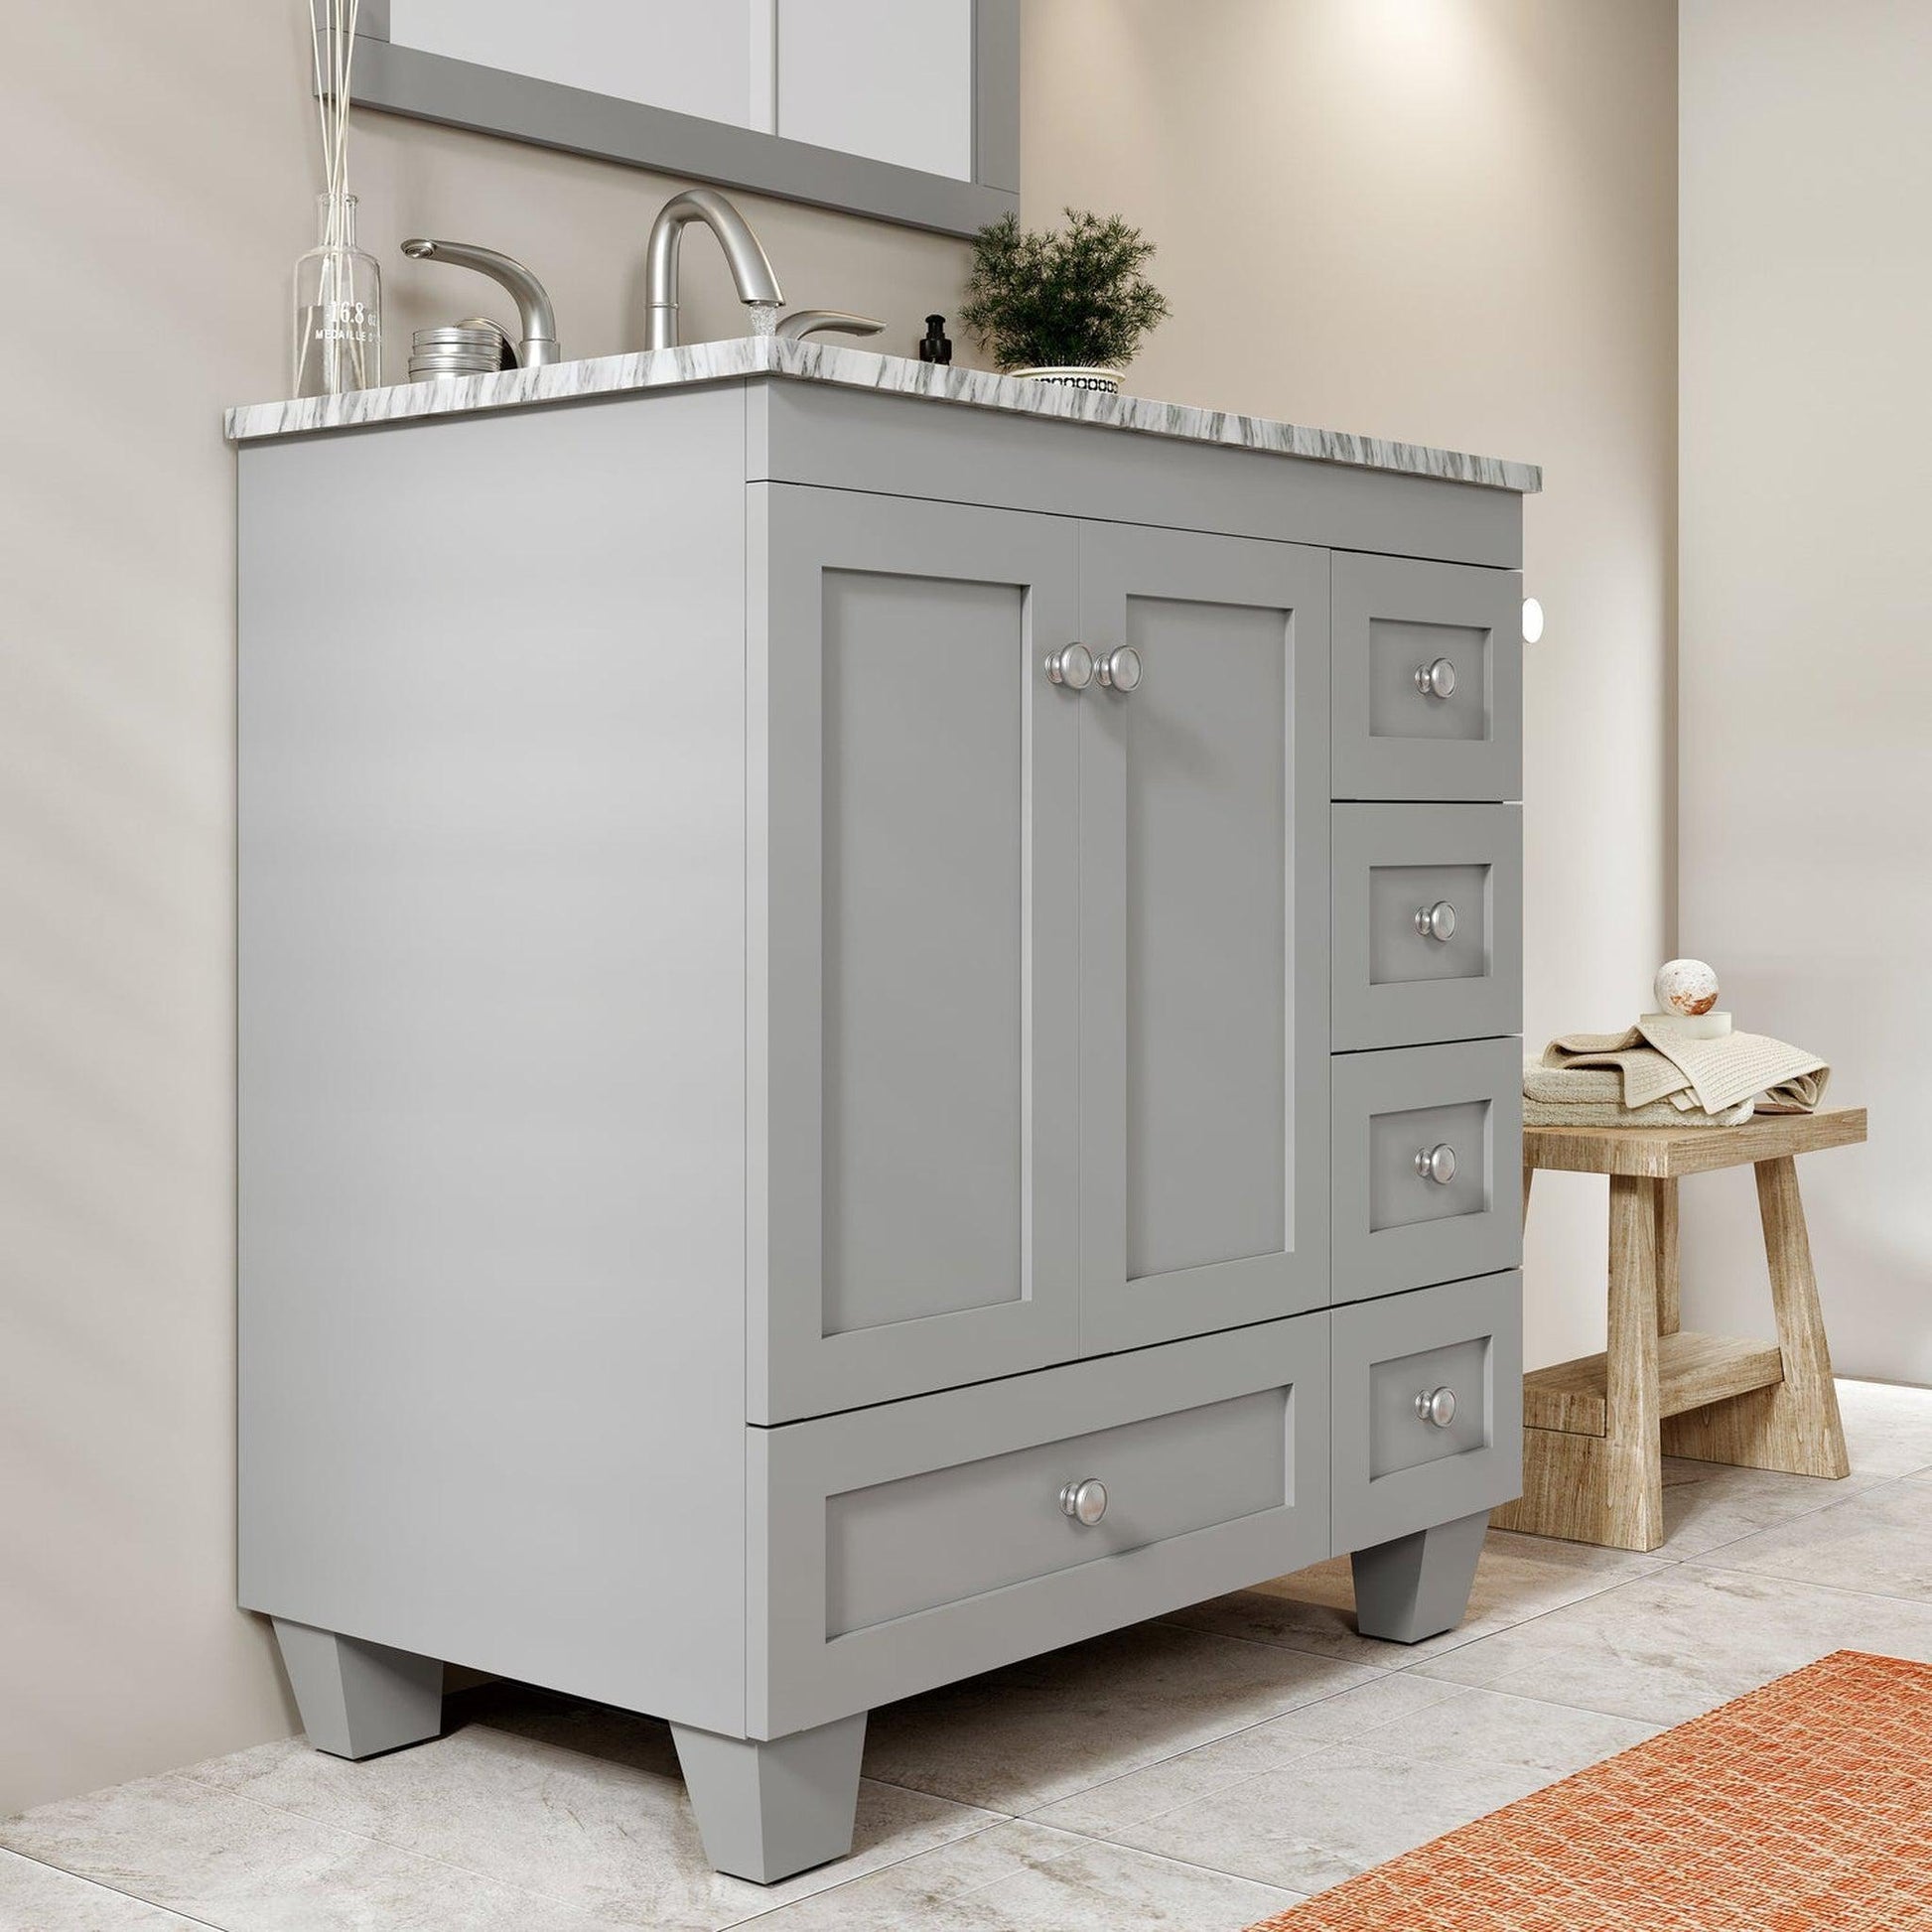 Magic Home 30 in. Functional Storage Wood Cabinet Freestanding Gray  Bathroom Vanity with White Sink Combo, 2-Doors, 1-Drawer ZG-8004H - The Home  Depot